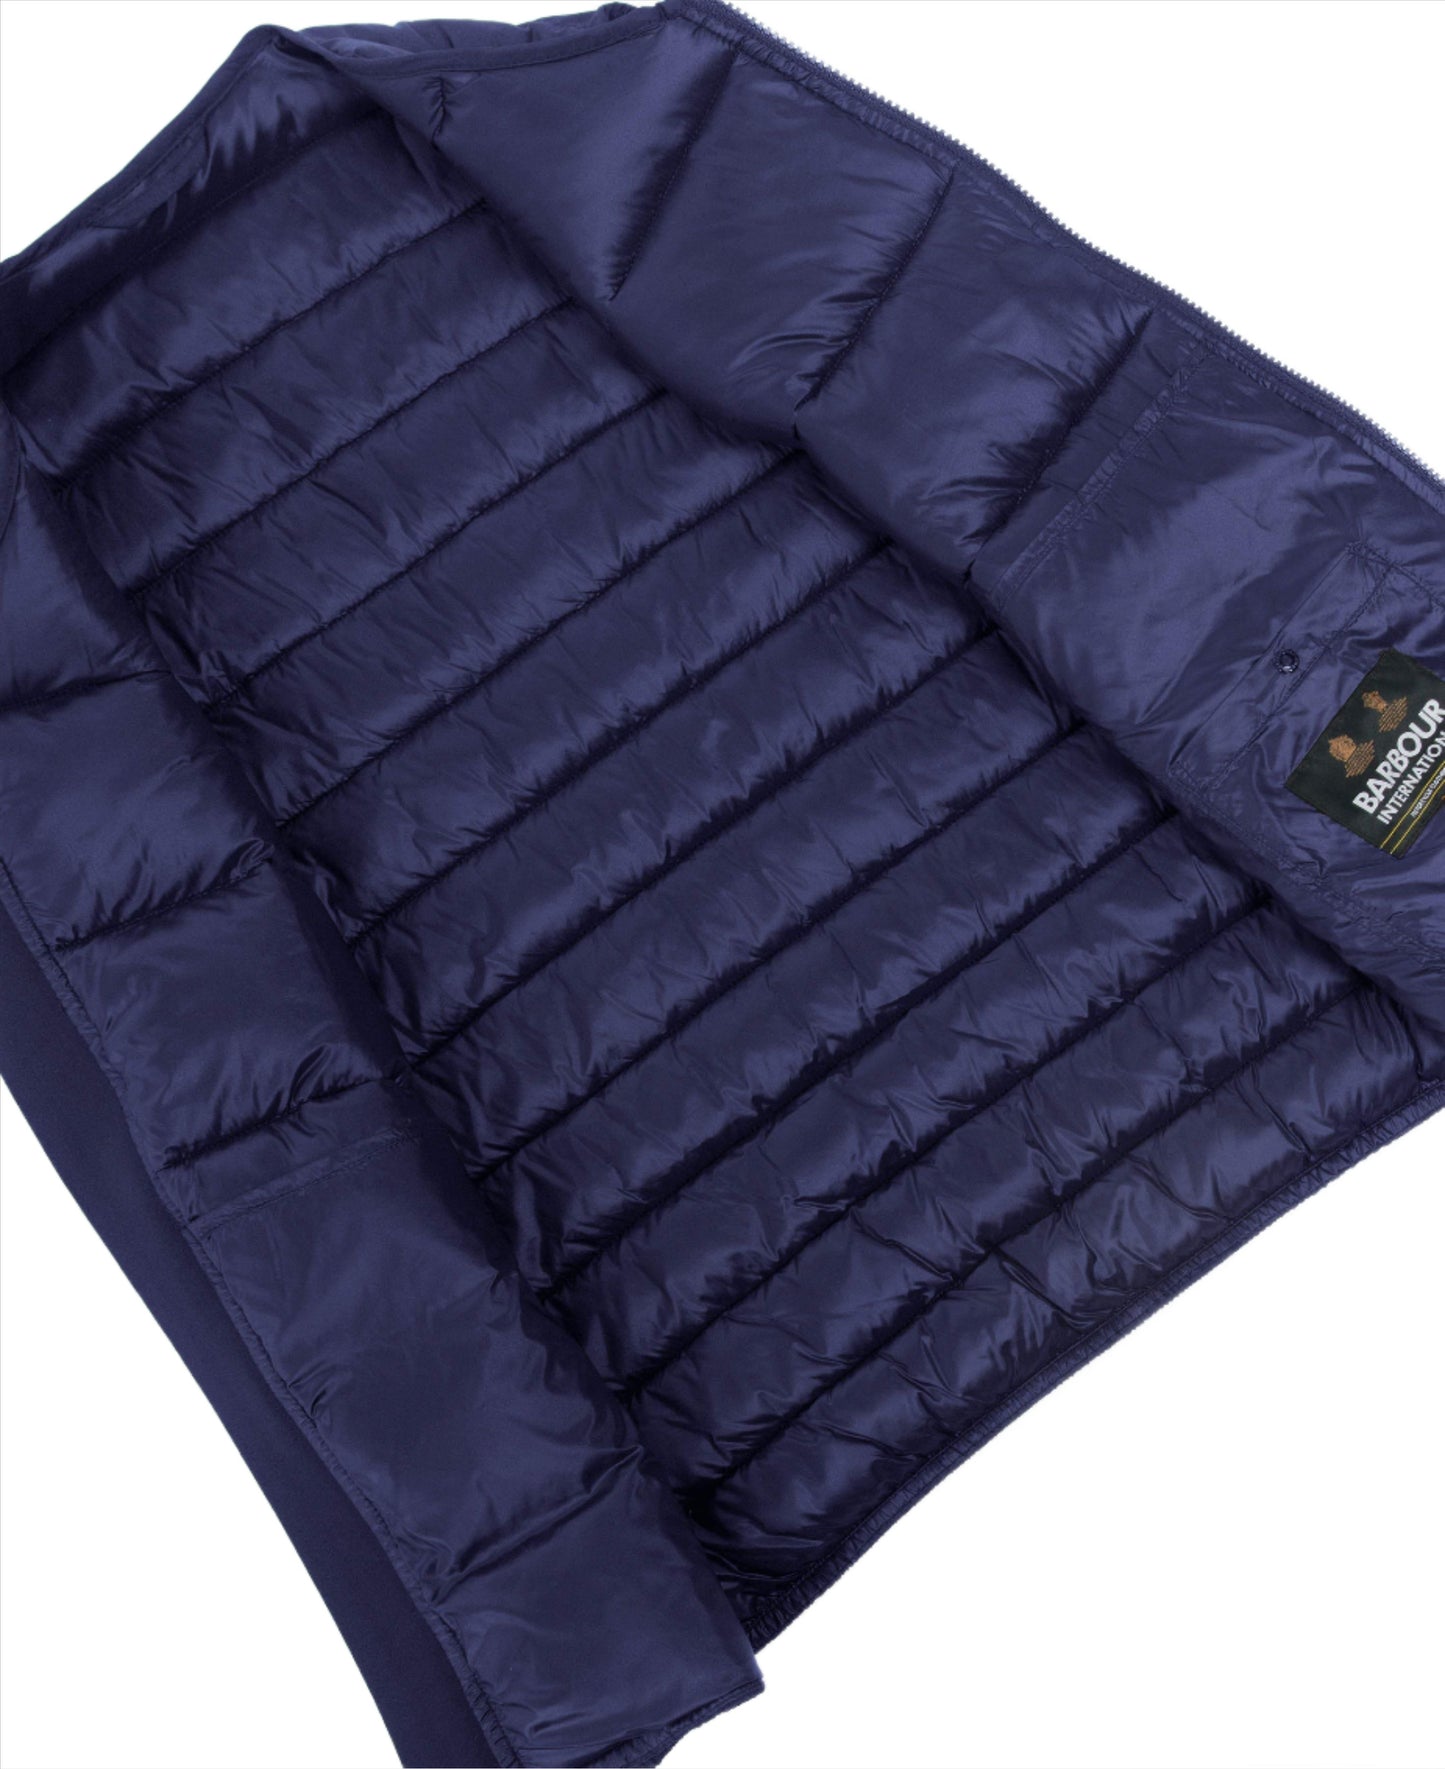 Barbour Ripley Quilted Gilet - The Luxury Promotional Gifts Company Limited